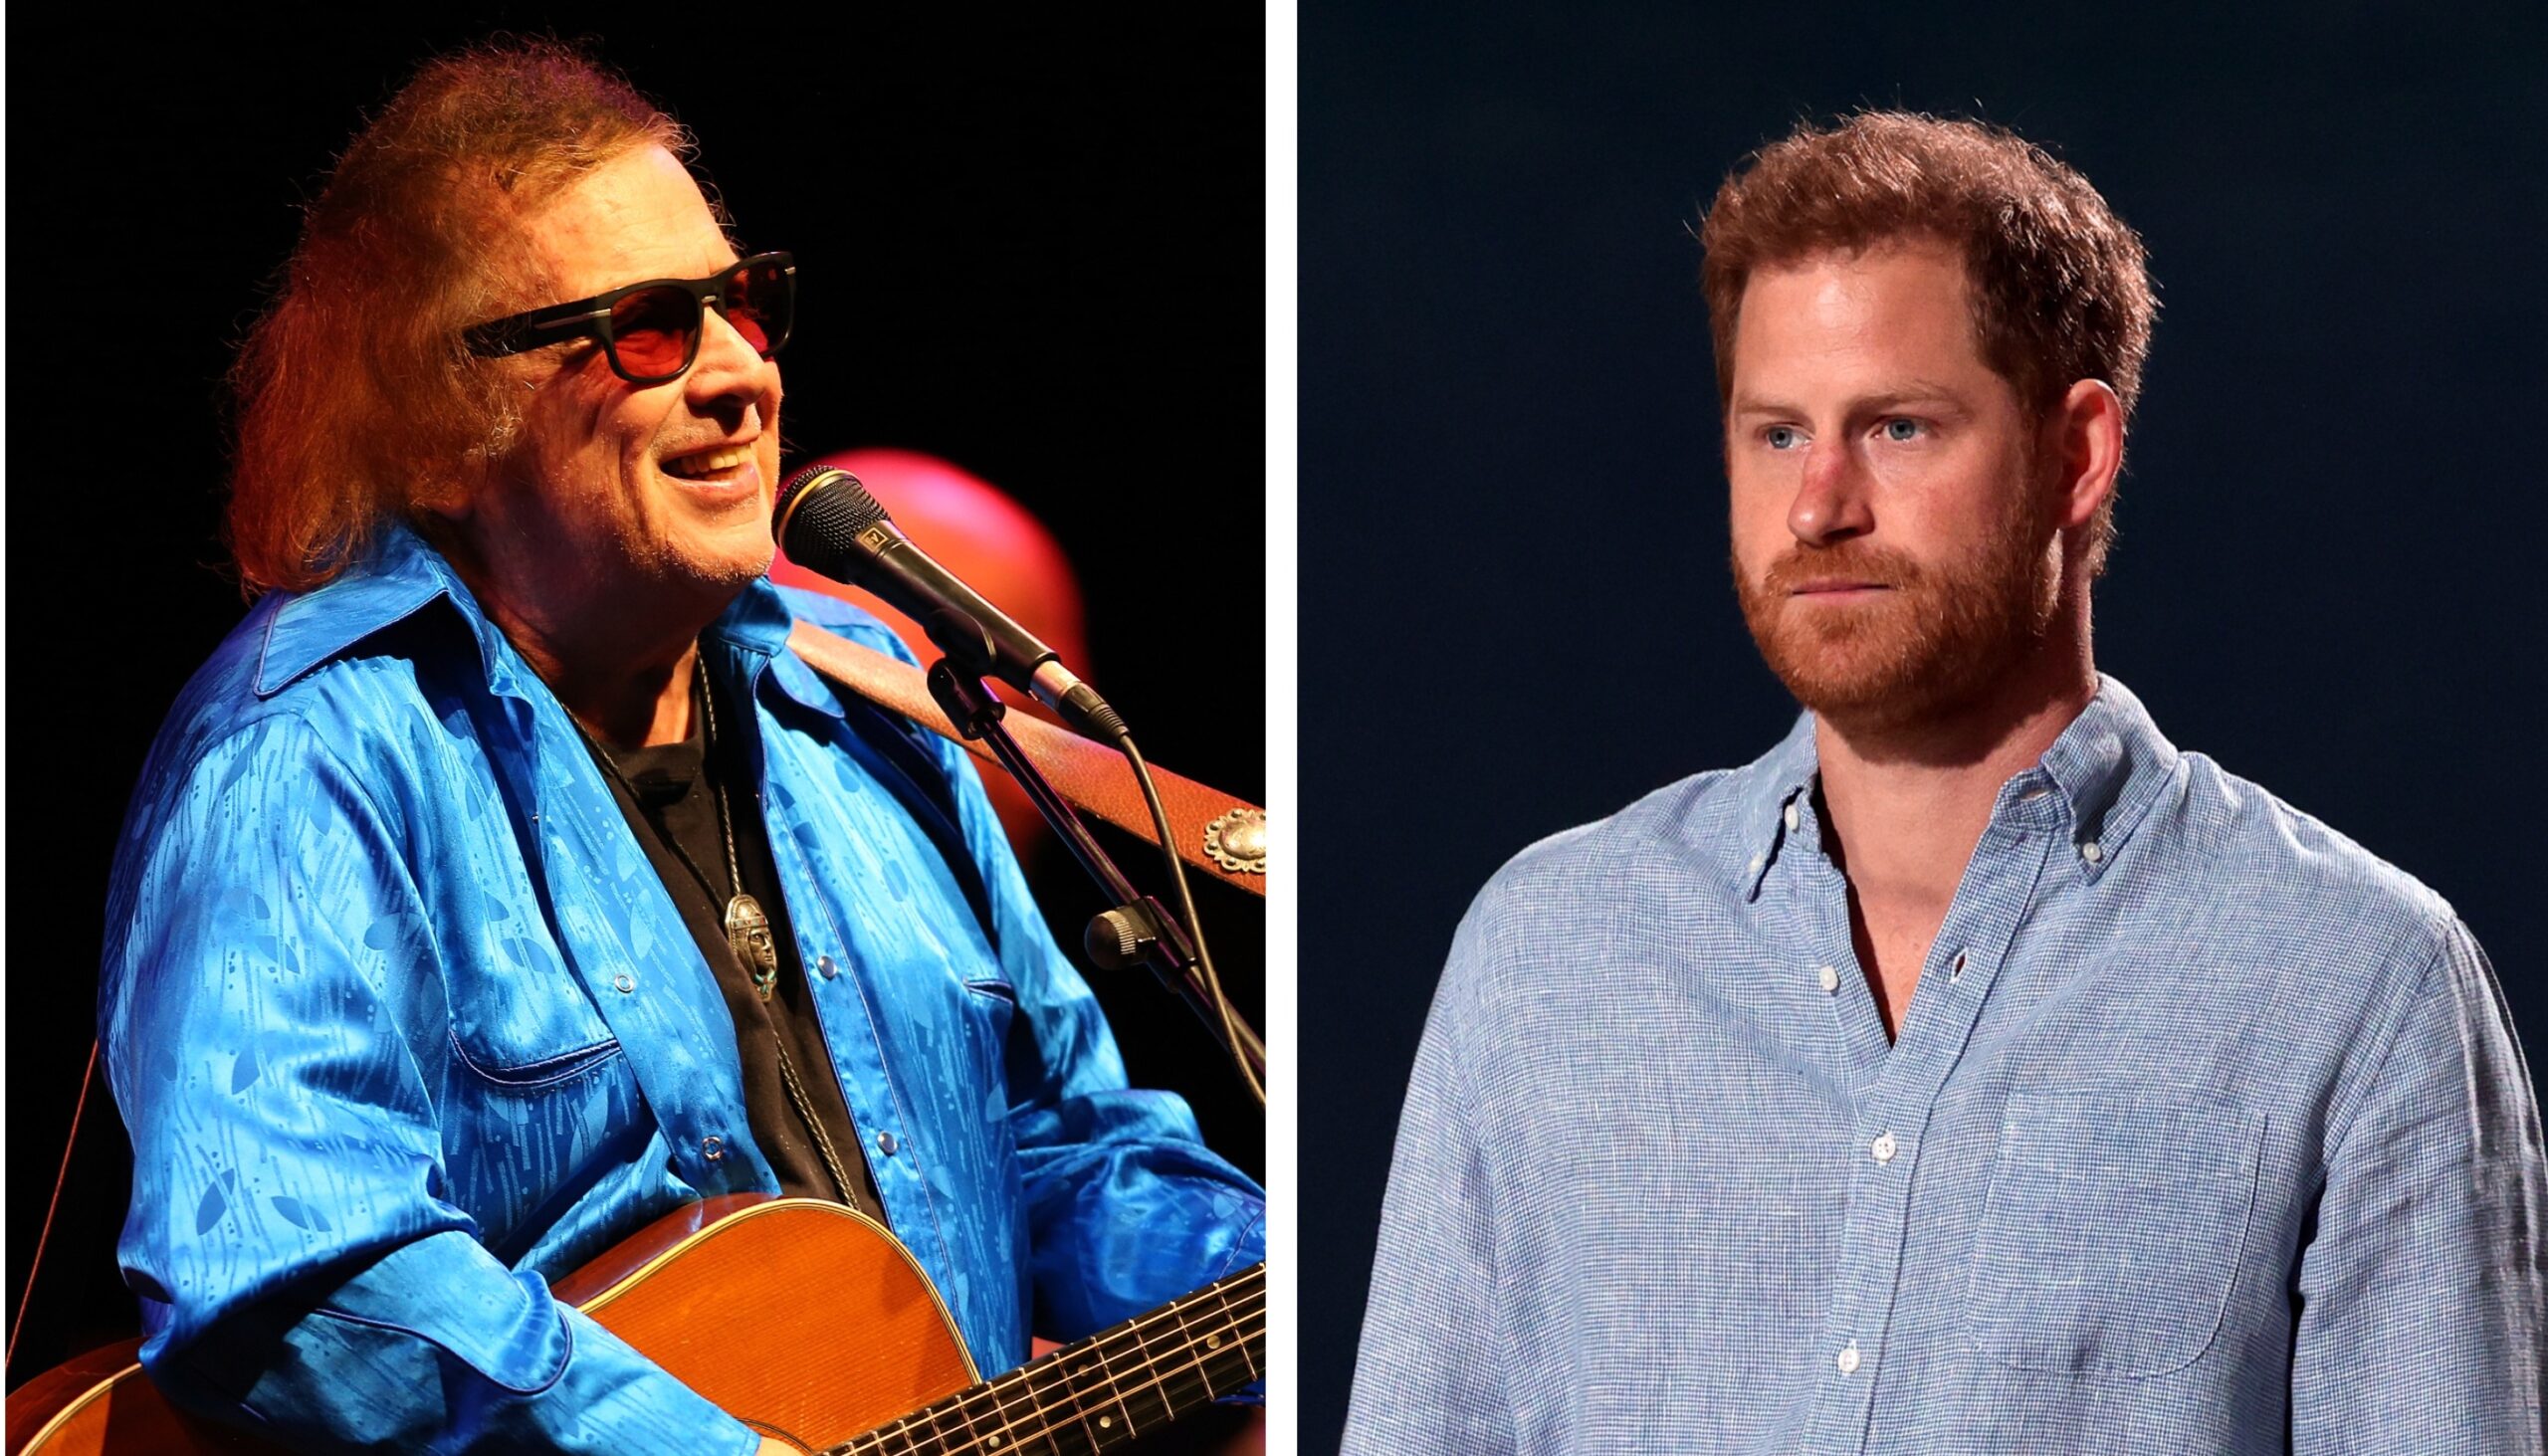 American Pie’ singer criticizes Prince Harry for his comment on Elvis’ house, saying he doesn’t understand America